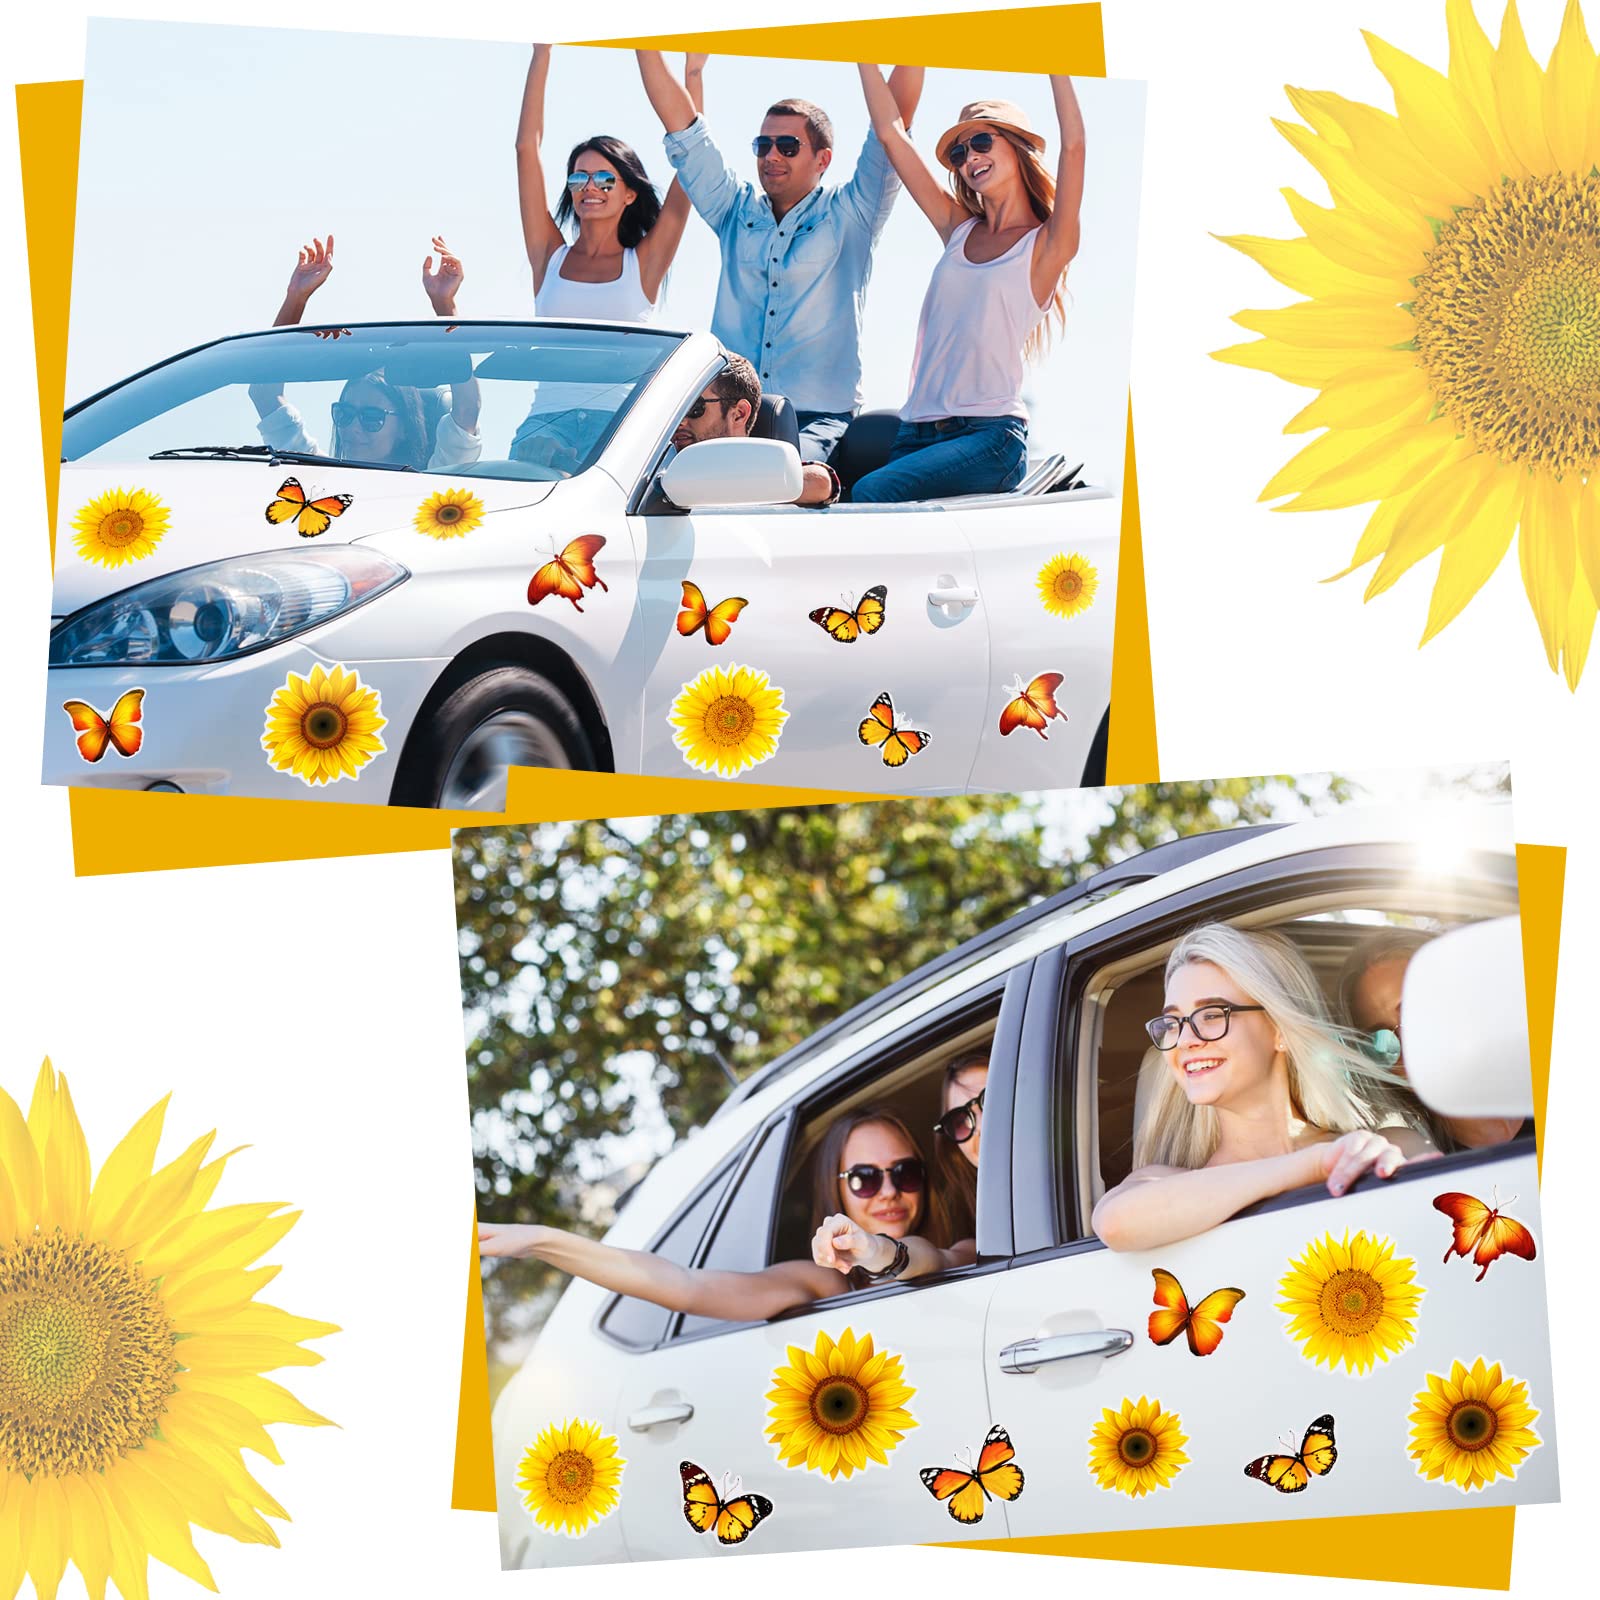 45 Pieces Butterfly Sunflower Magnet Car Refrigerator Magnets Removable Butterfly Sunflower Kitchen Decor and Accessories Cute Flower Magnets Vintage Magnets for Whiteboard Home Office